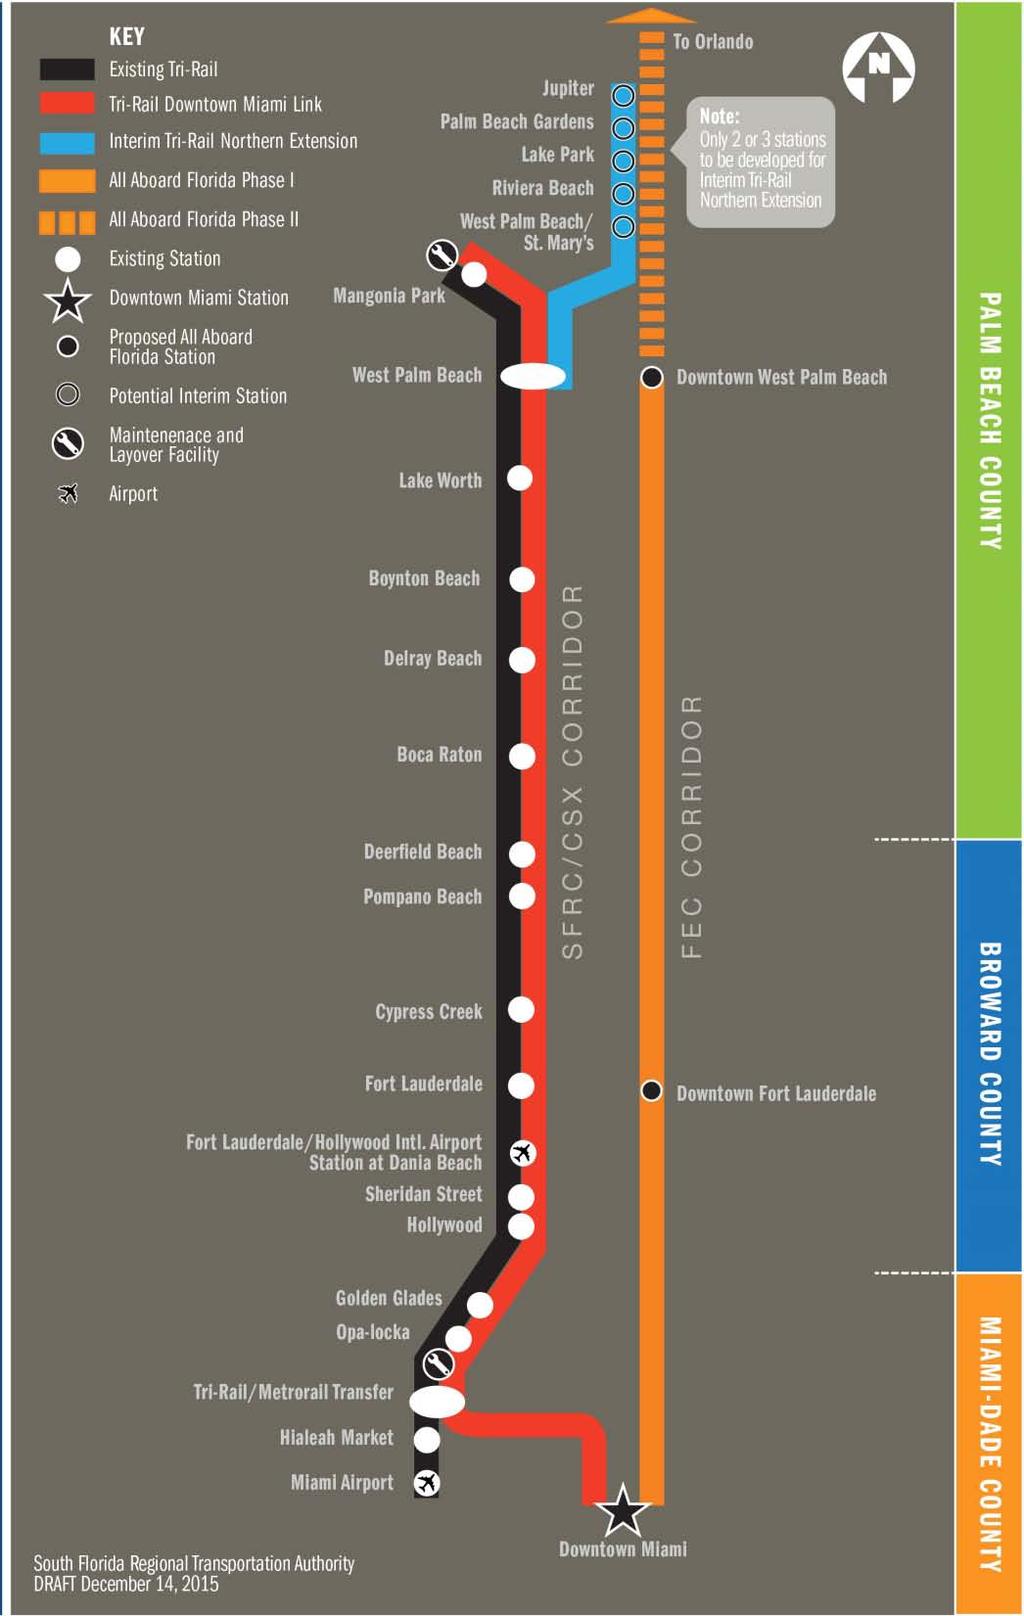 Tri-Rail Jupiter Extension + Downtown Miami Link Jupiter/Northern Extension next logical step for phased Tri-Rail expansion onto FEC Northwood rail connection